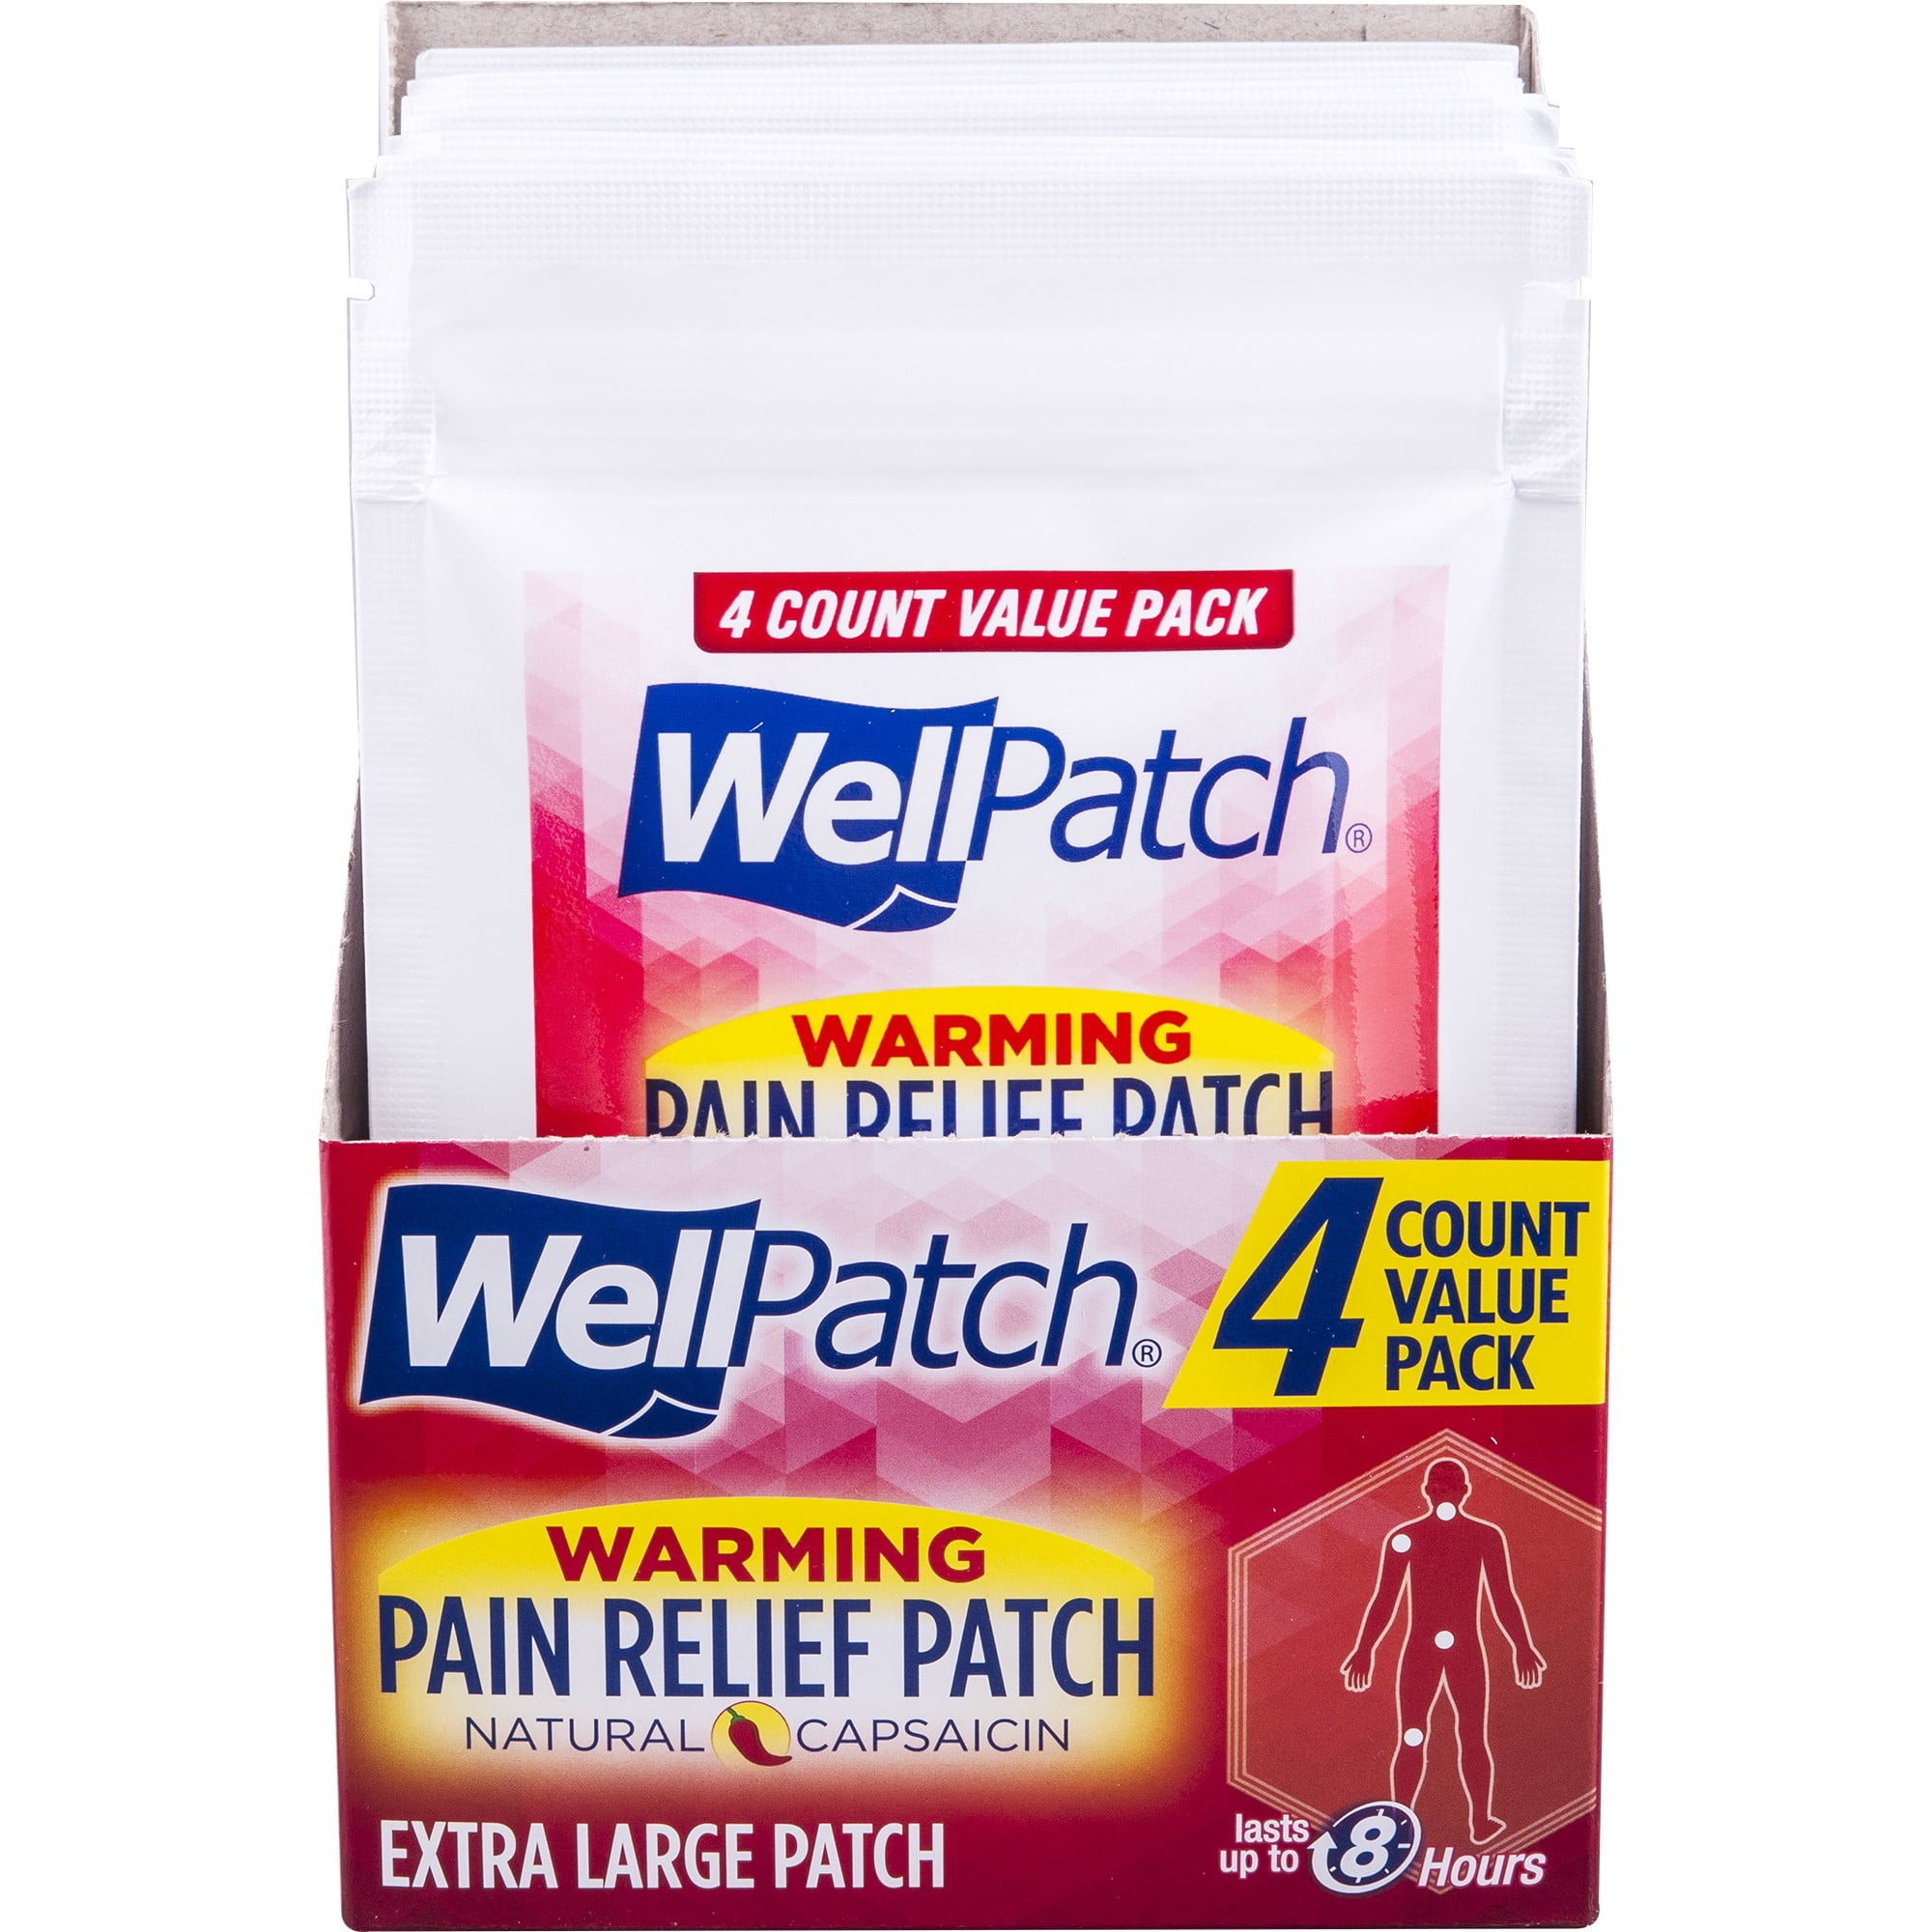 Buy WellPatch Capsaicin Pain Pads, Box of 4 - 3/4x 7- Pack of 5